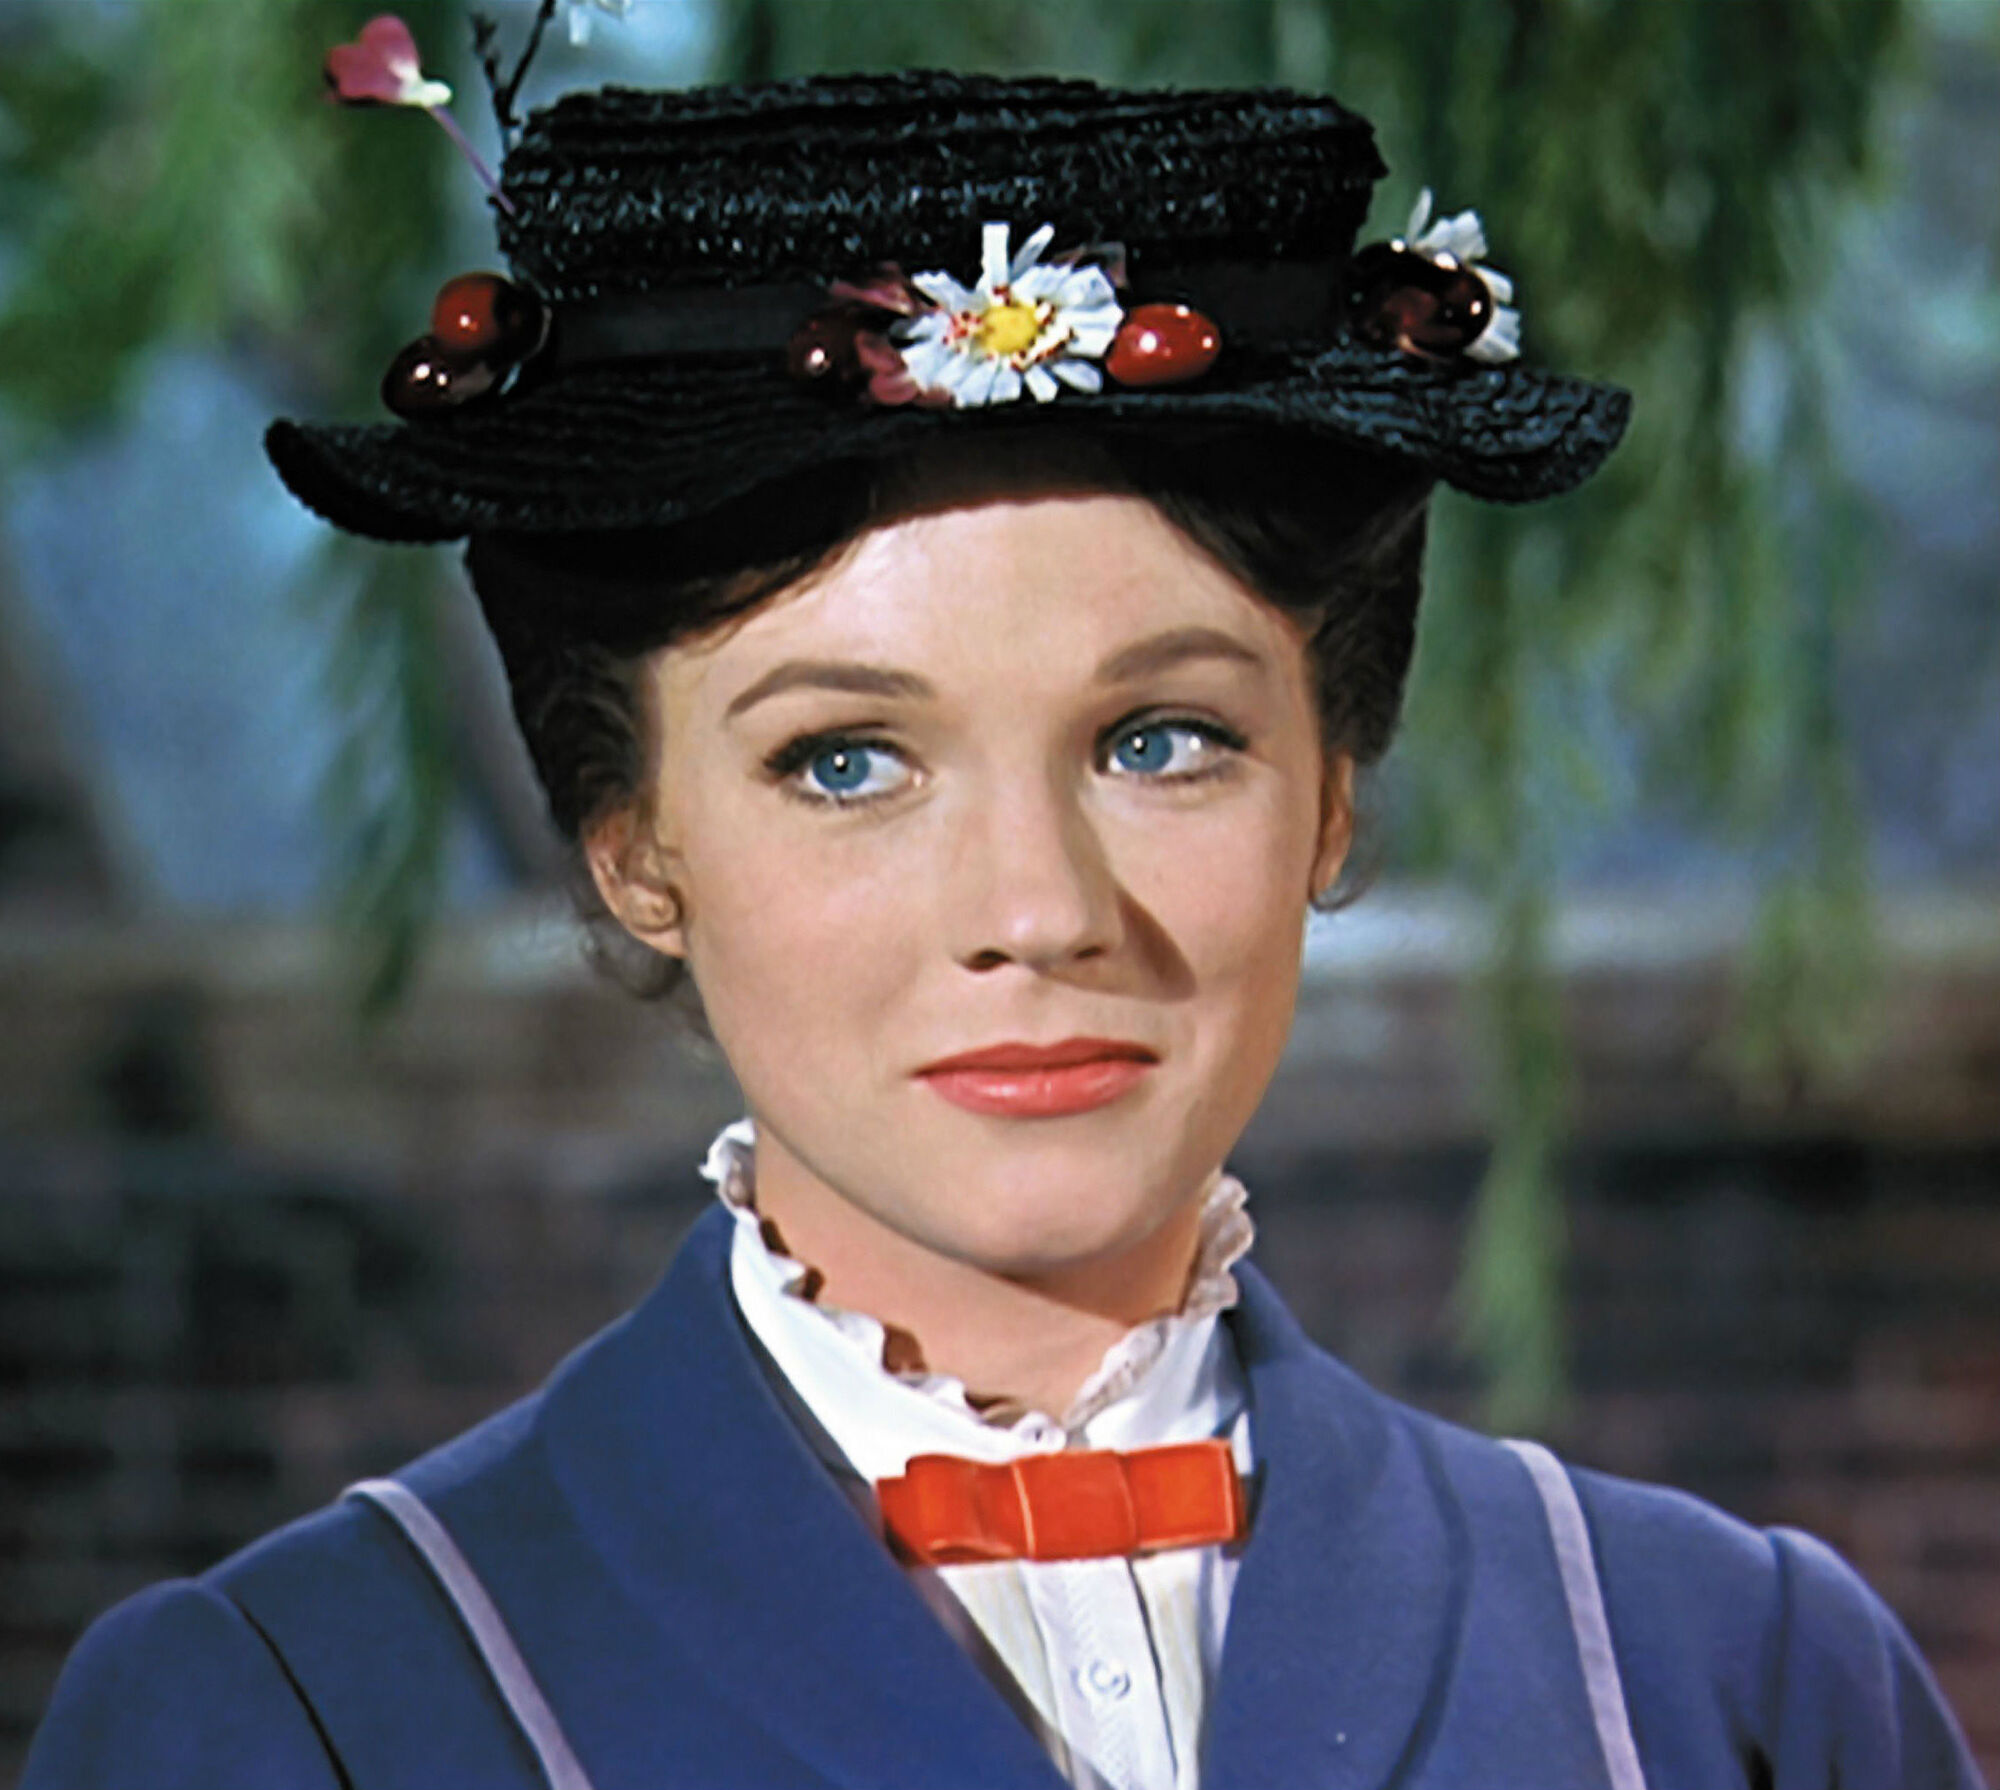 Les Personnages De Mary Poppins